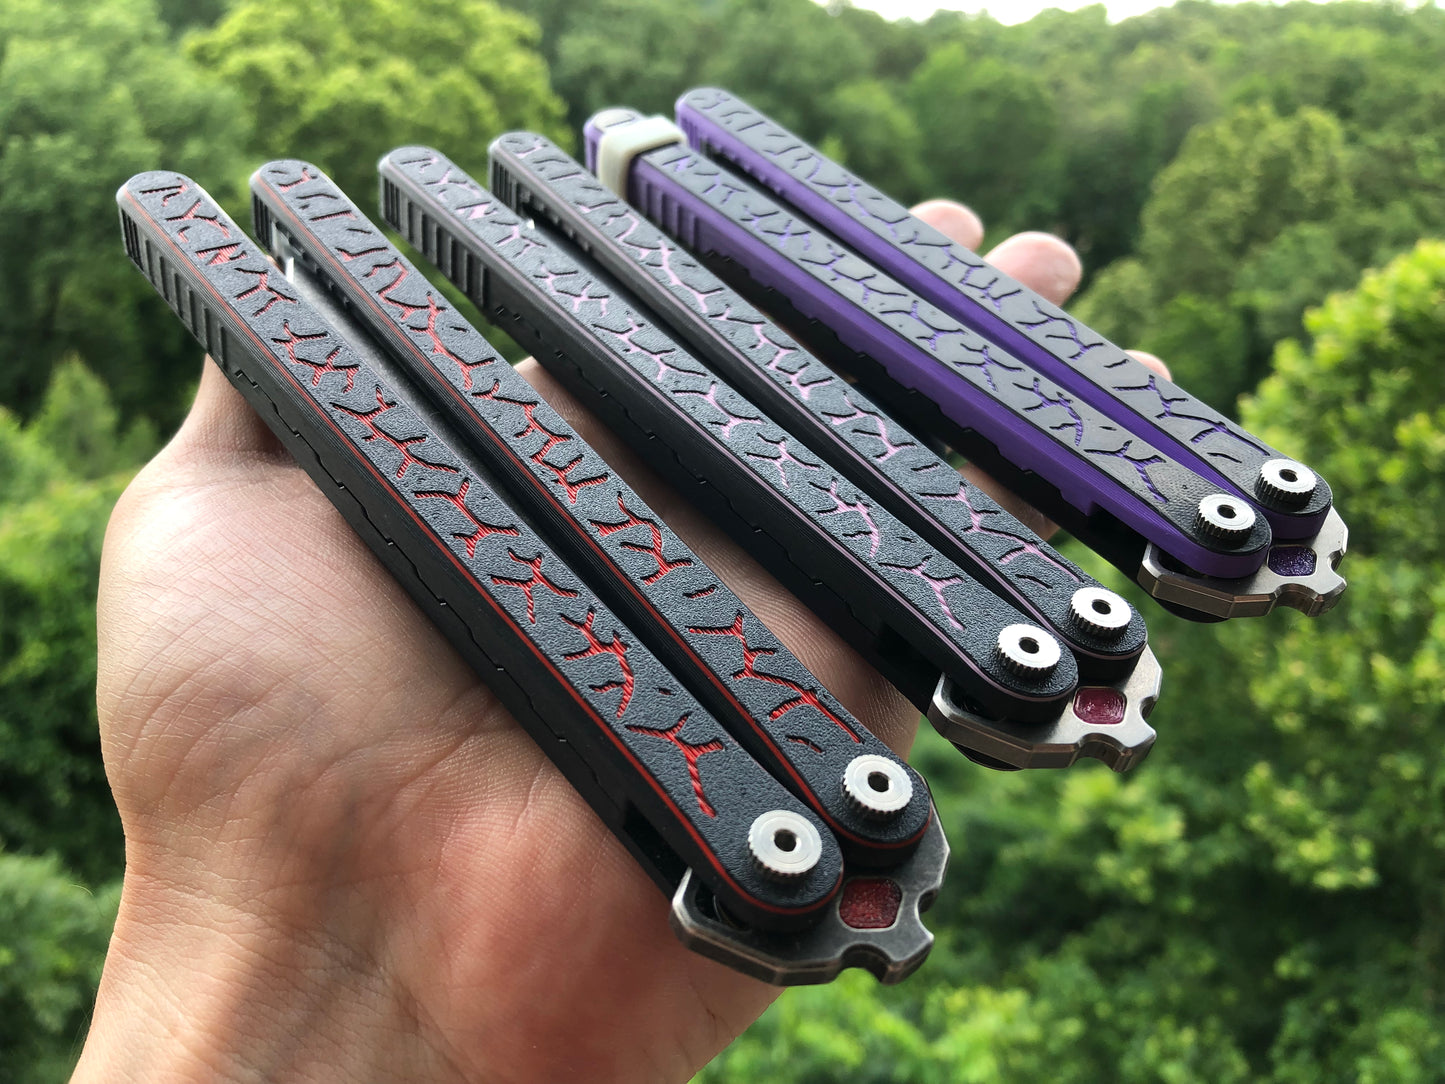 ZippyLucha Handles (aka ZLucha) are back and better than ever in the v2. ZLucha handles are a set of aftermarket handles for the Kershaw Lucha Balisong (live blade). They lighten the Lucha (3.55 oz), improve the balance for flipping, and introduce the high-performance threadlocker-free Zippy pivot/bearing system.